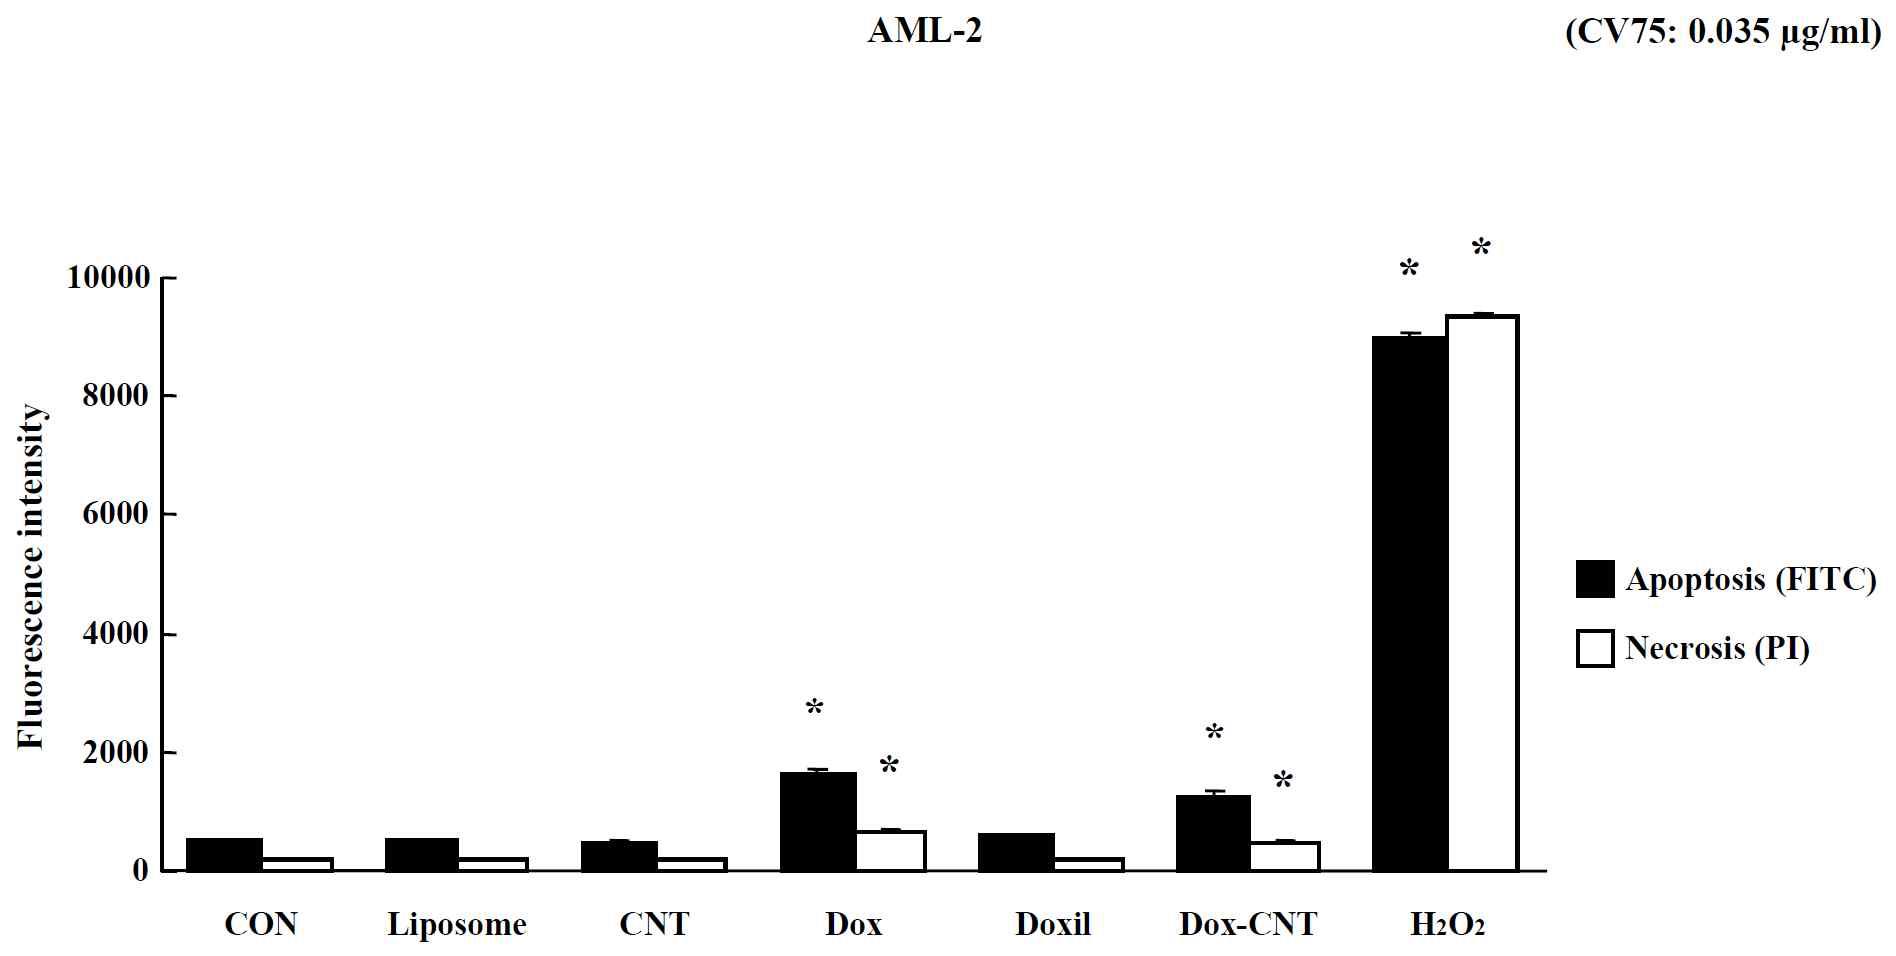 Effects of nano-anticancer drugs in the apoptosis & necrosis of AML-2 cells. Cells were exposed to 0.035 μg/ml and analyzed by Annexin V-FITC/PI staining. Data are shown as means ± SE (n = 5). * p<0.05, significantly different from the control.